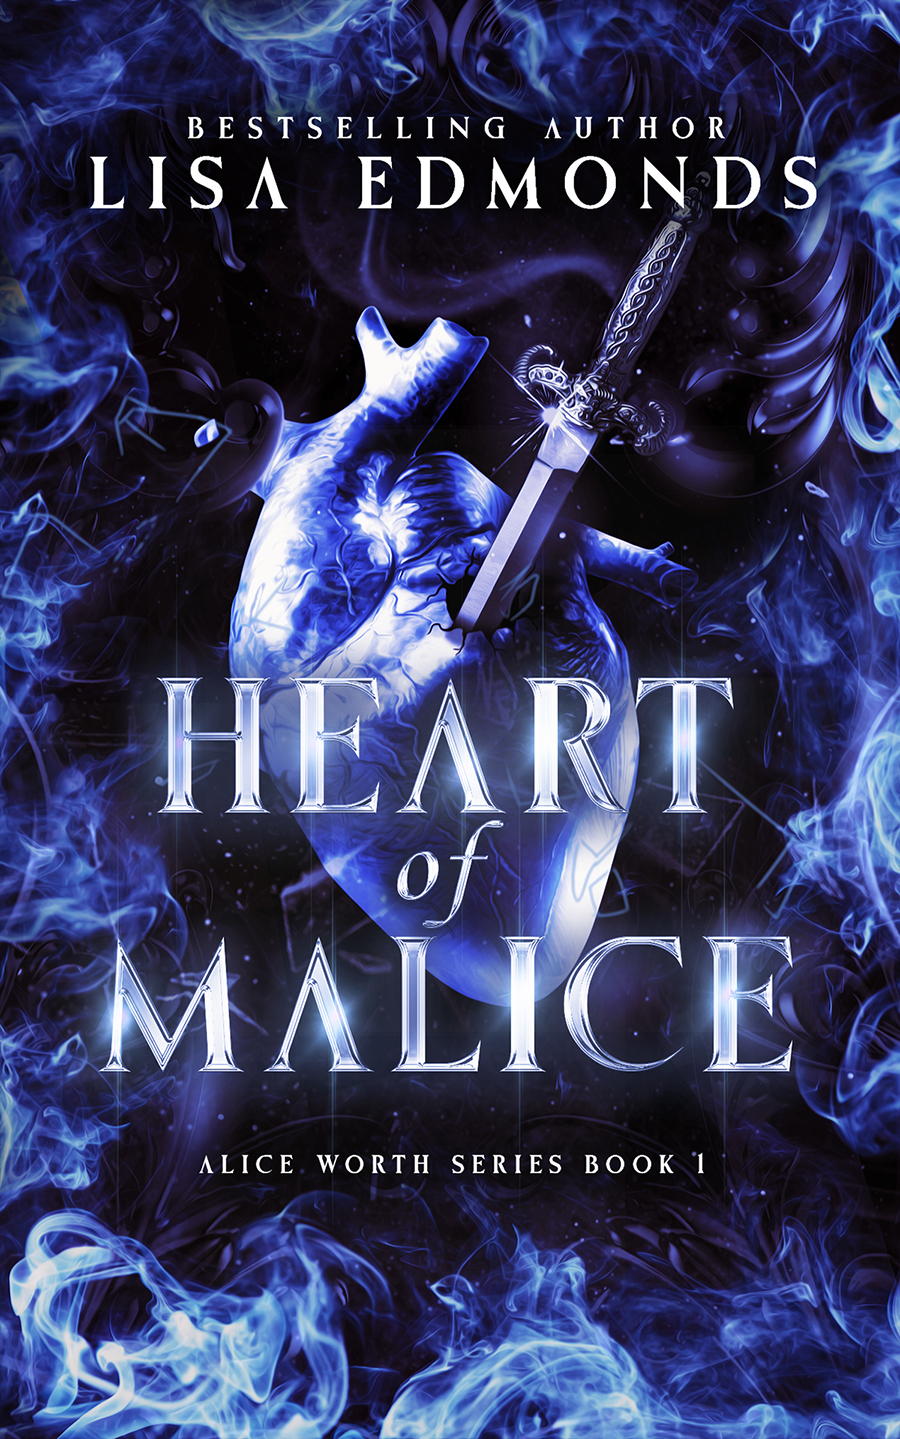 Book cover with image of anatomical heart pierced with a dagger, blue magic and flames, with text "Bestselling Author Lisa Edmonds" and "Heart of Malice"